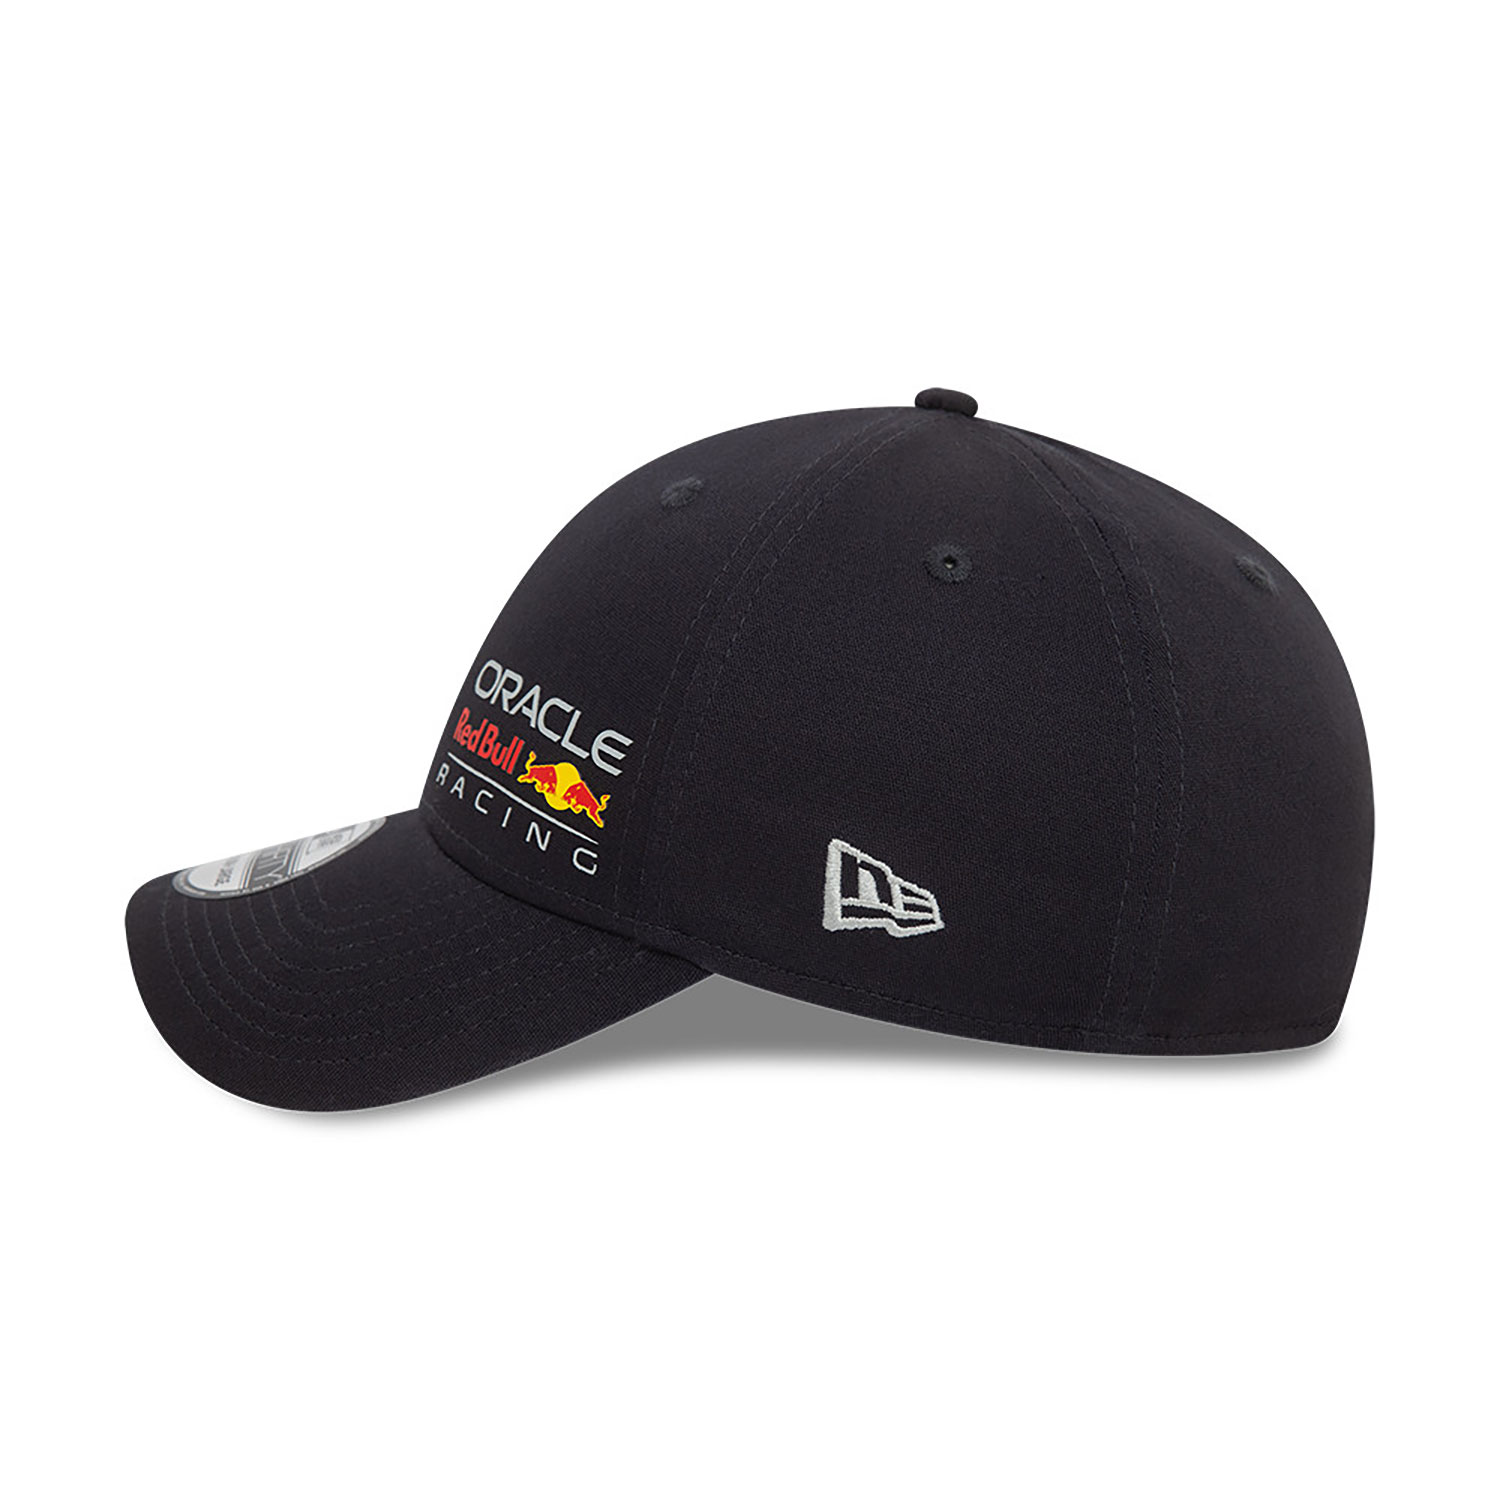 Red Bull Racing Flawless Navy 39THIRTY Stretch Fit Cap